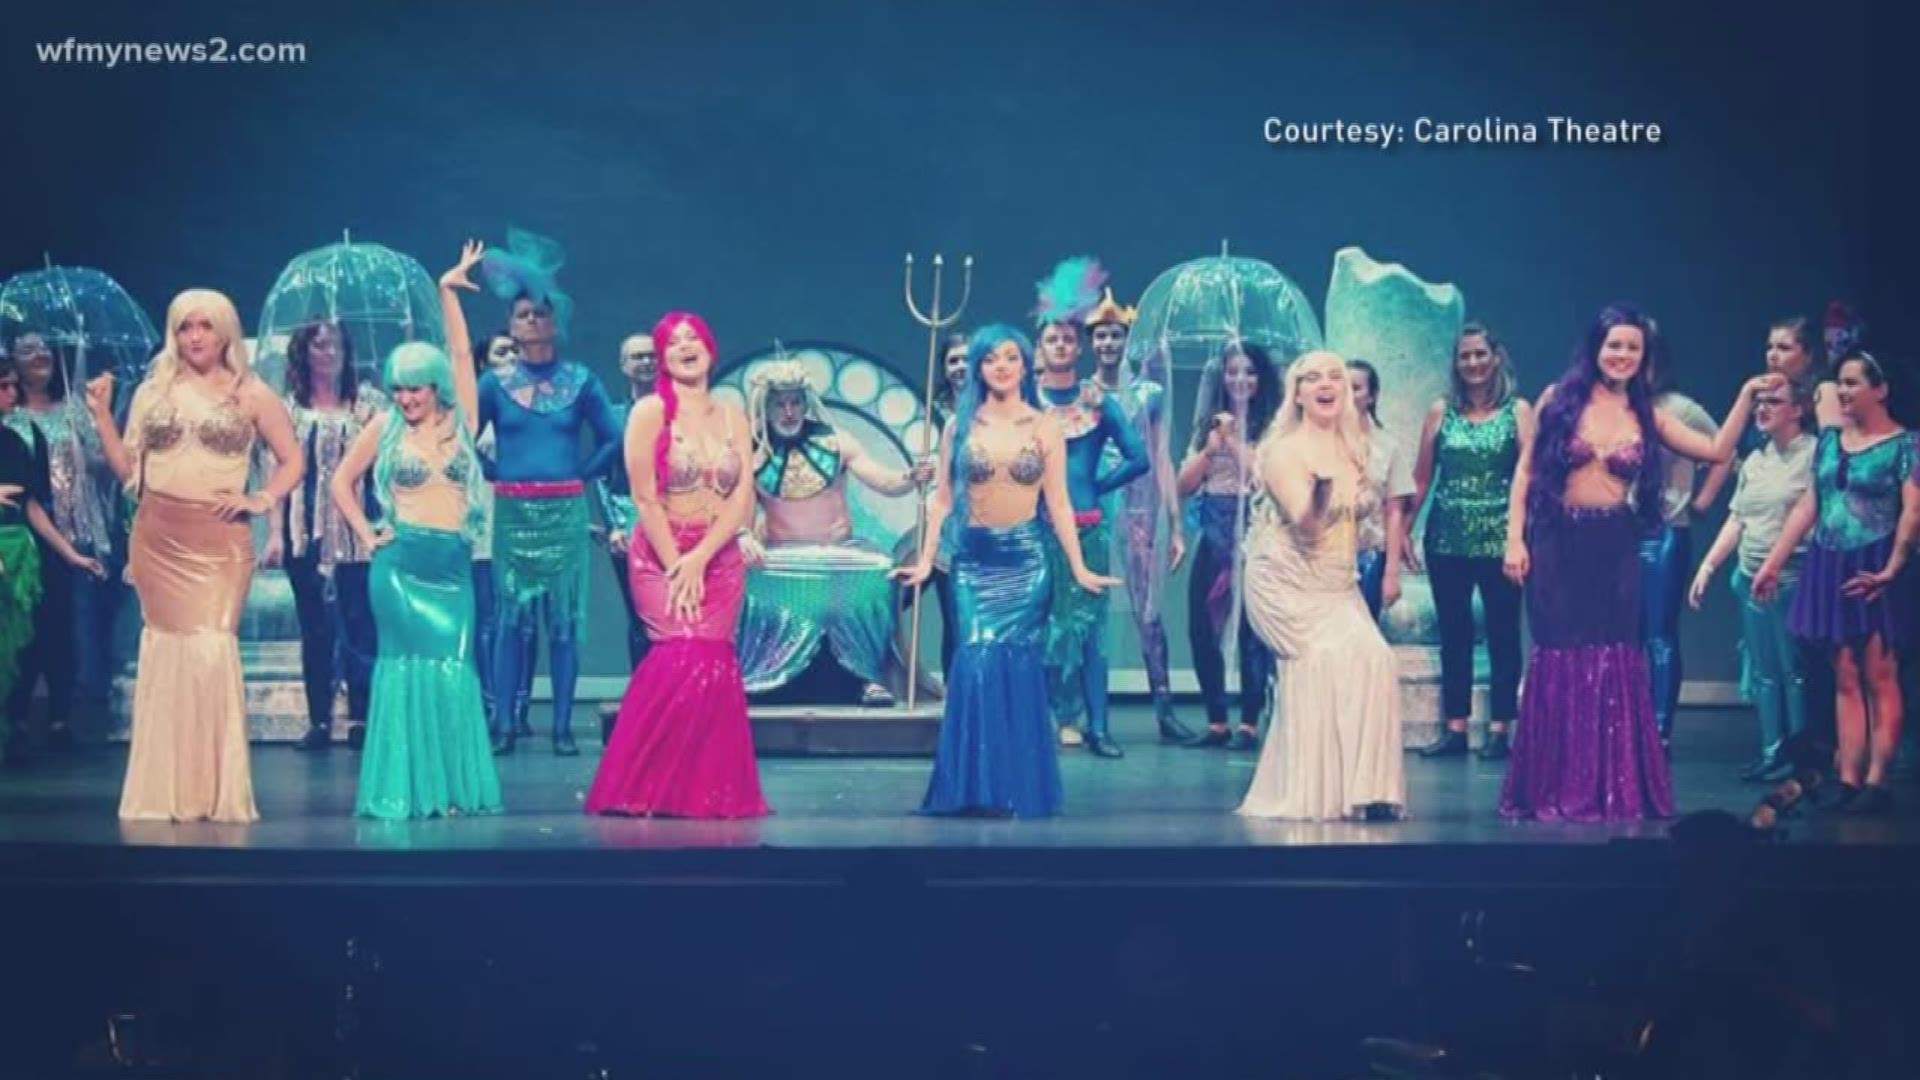 "The Little Mermaid" Playing At Carolina Theatre